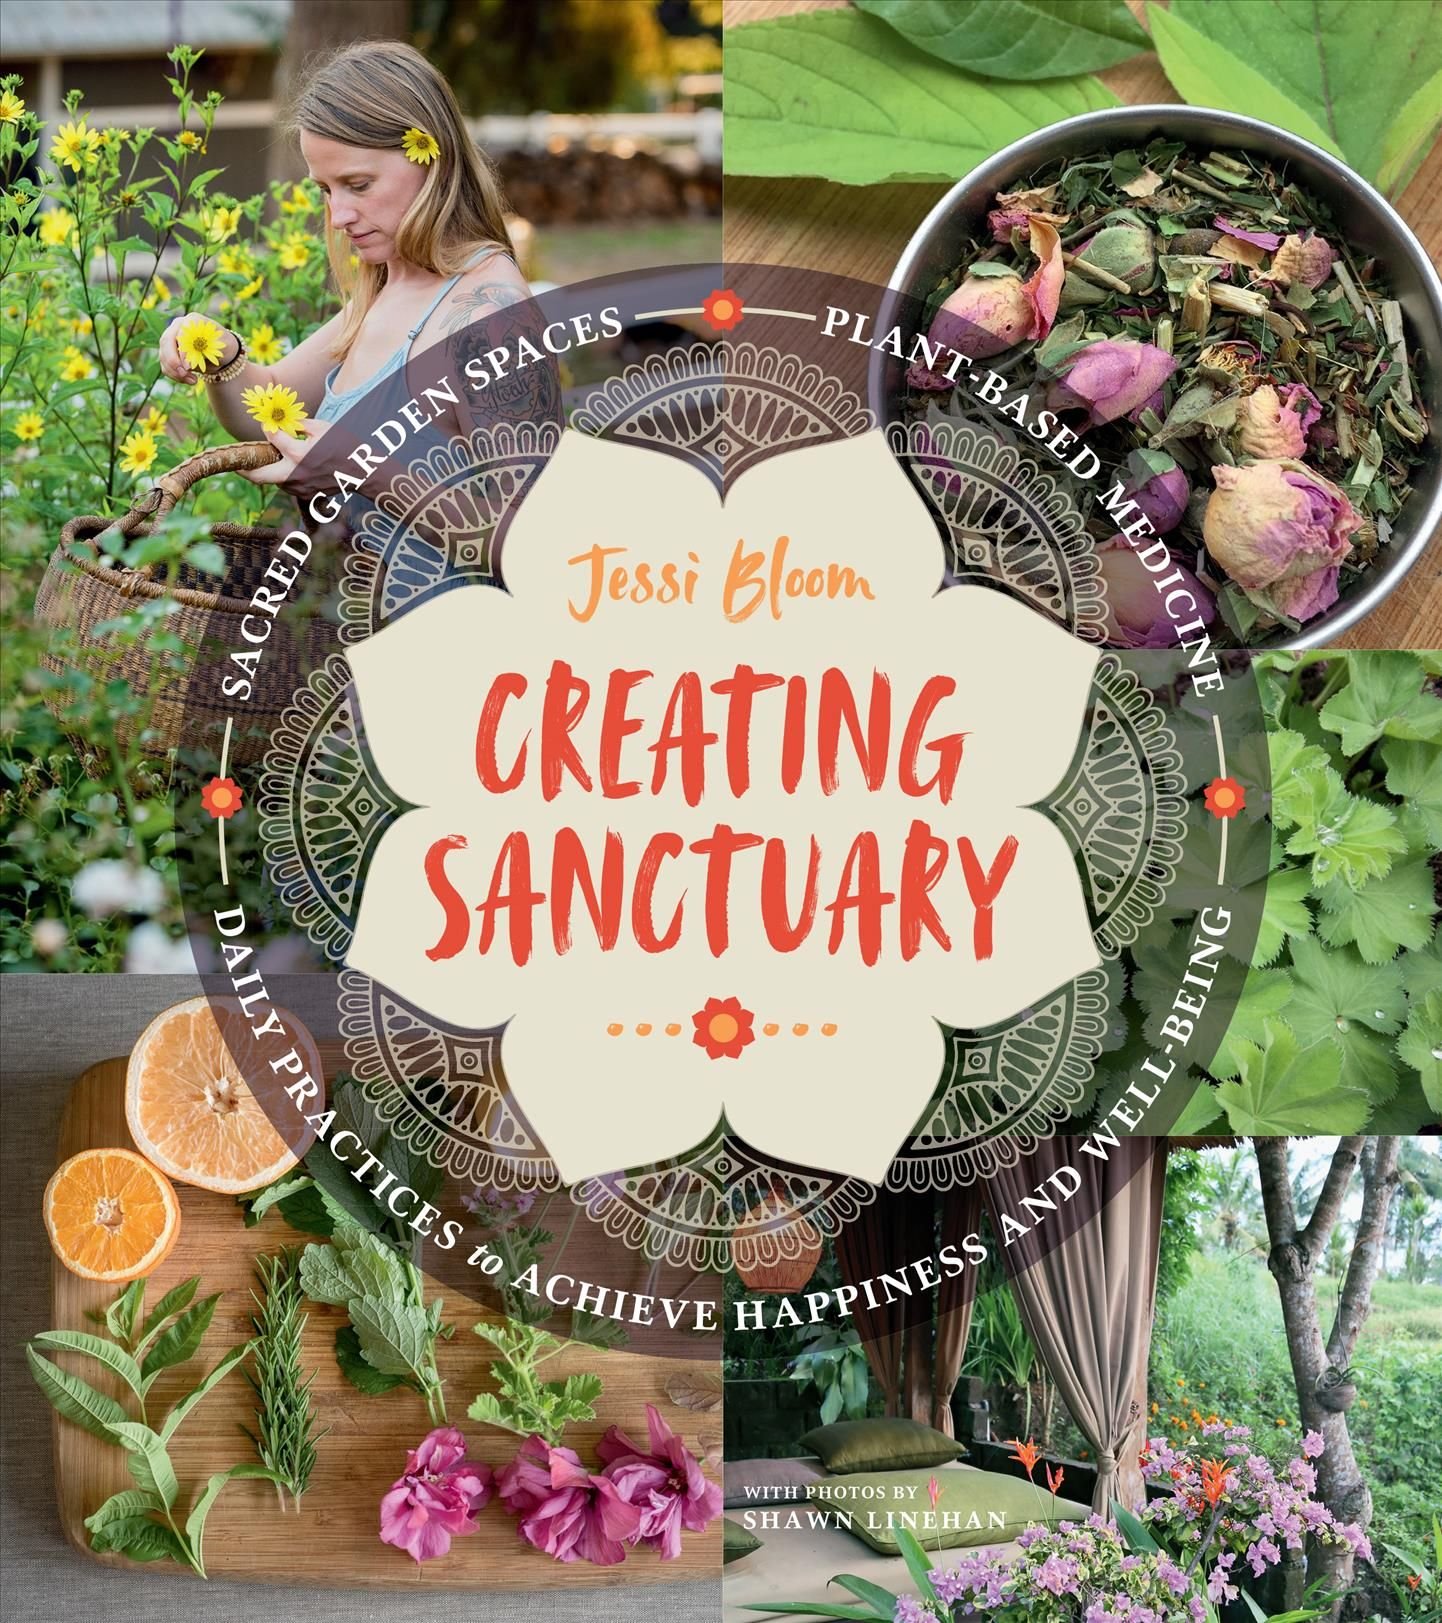 Creating Sanctuary: Sacred Garden Spaces, Plant-Based Medicine and Daily Practices to Achieve Happiness and Well-Being